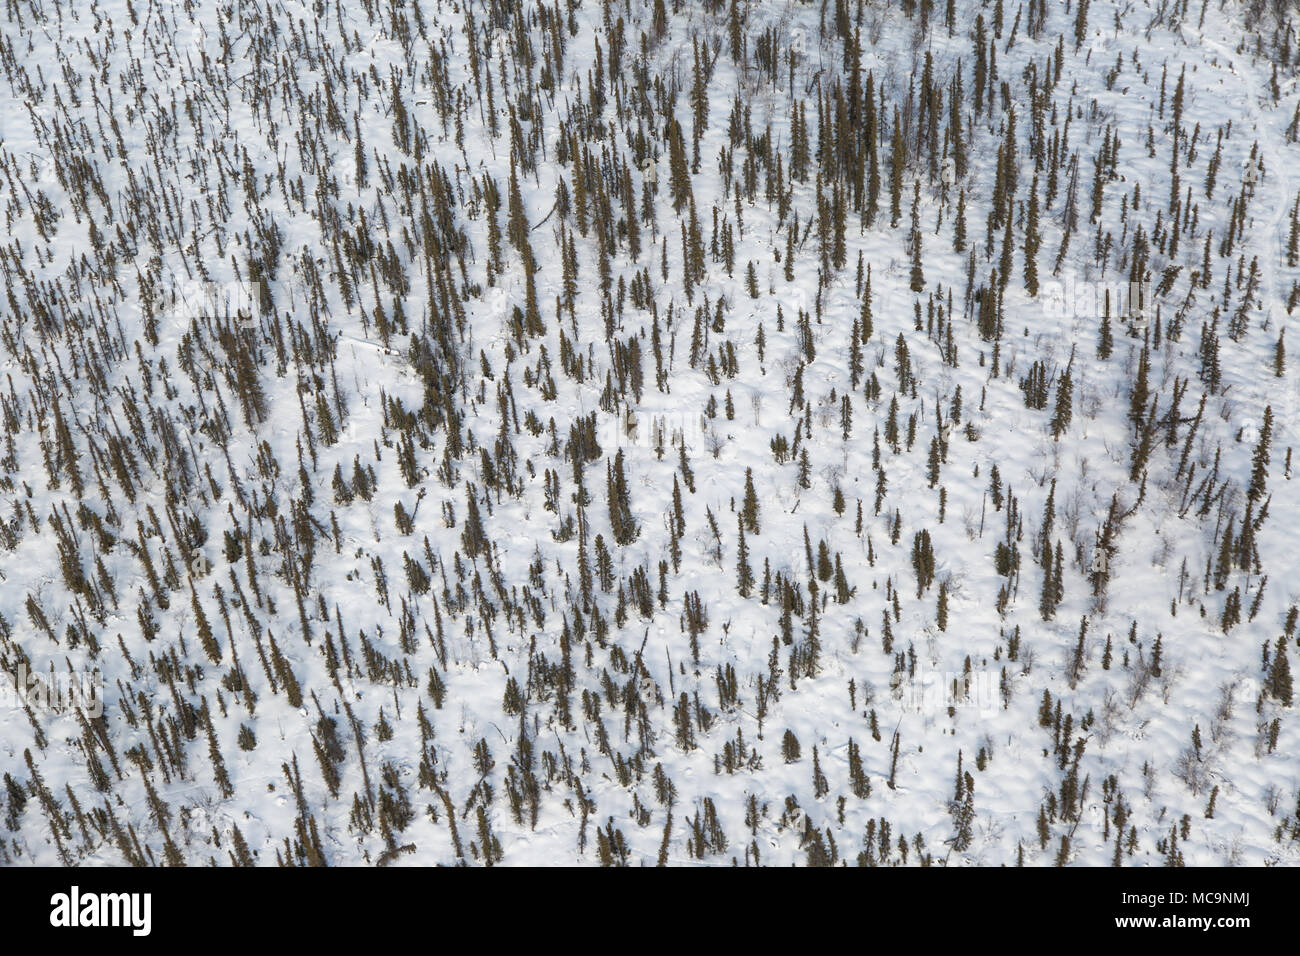 Aerial view of spruce trees in winter, 200 kilometres north of the Arctic Circle, Inuvik, Northwest Territories, Canada Stock Photo